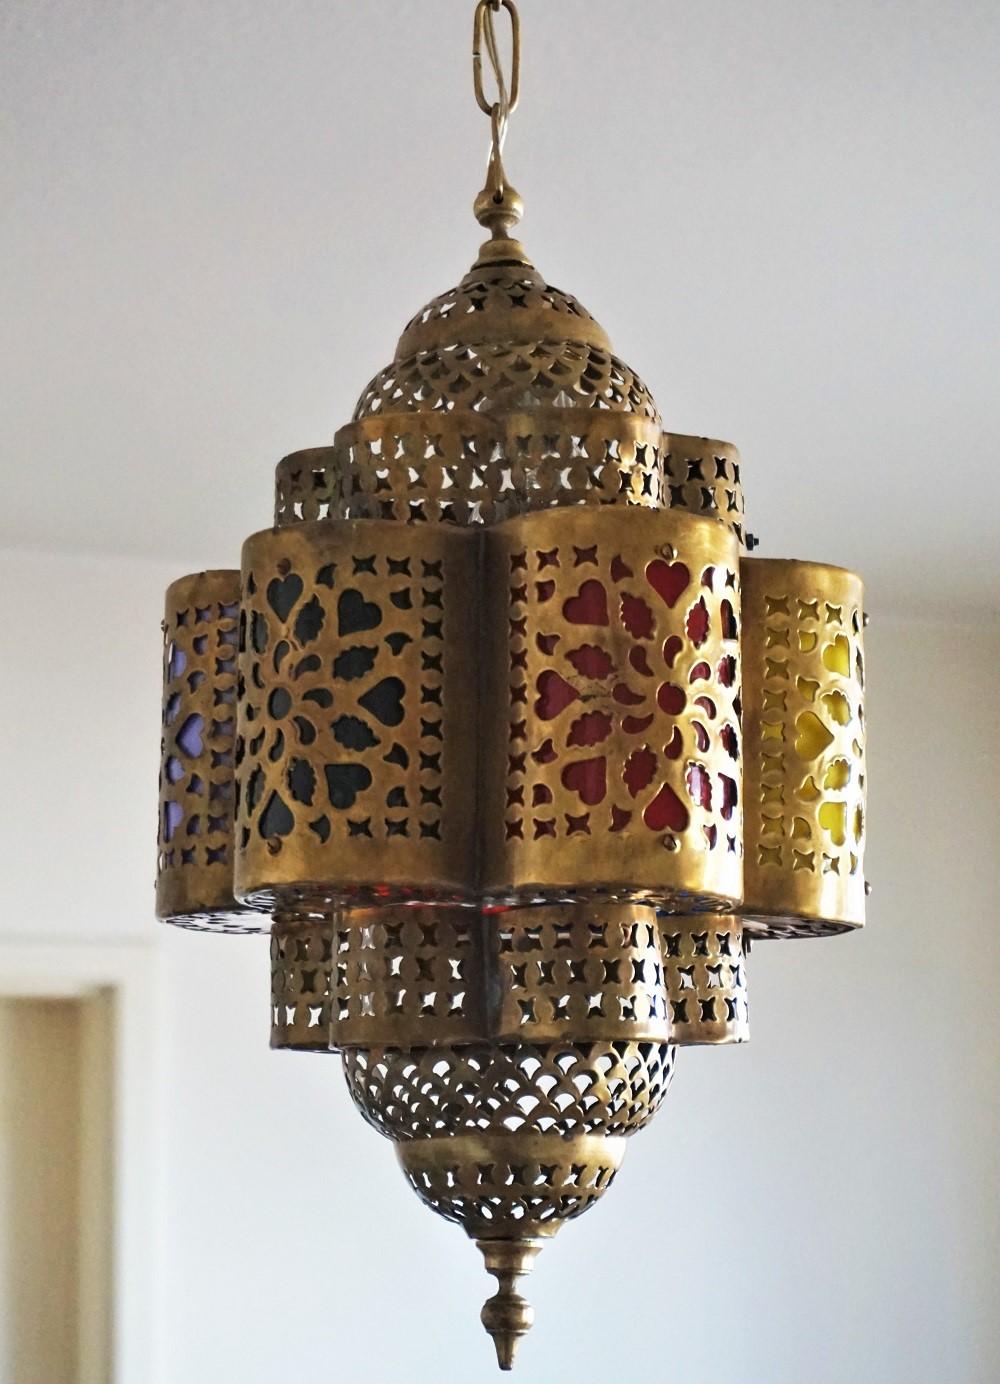 Moroccan handcrafted hexagonal pierced brass lantern with multi-color Lucite fragments.
One E27 light bulb socket - European wiring
Dimensions:
Total height 33